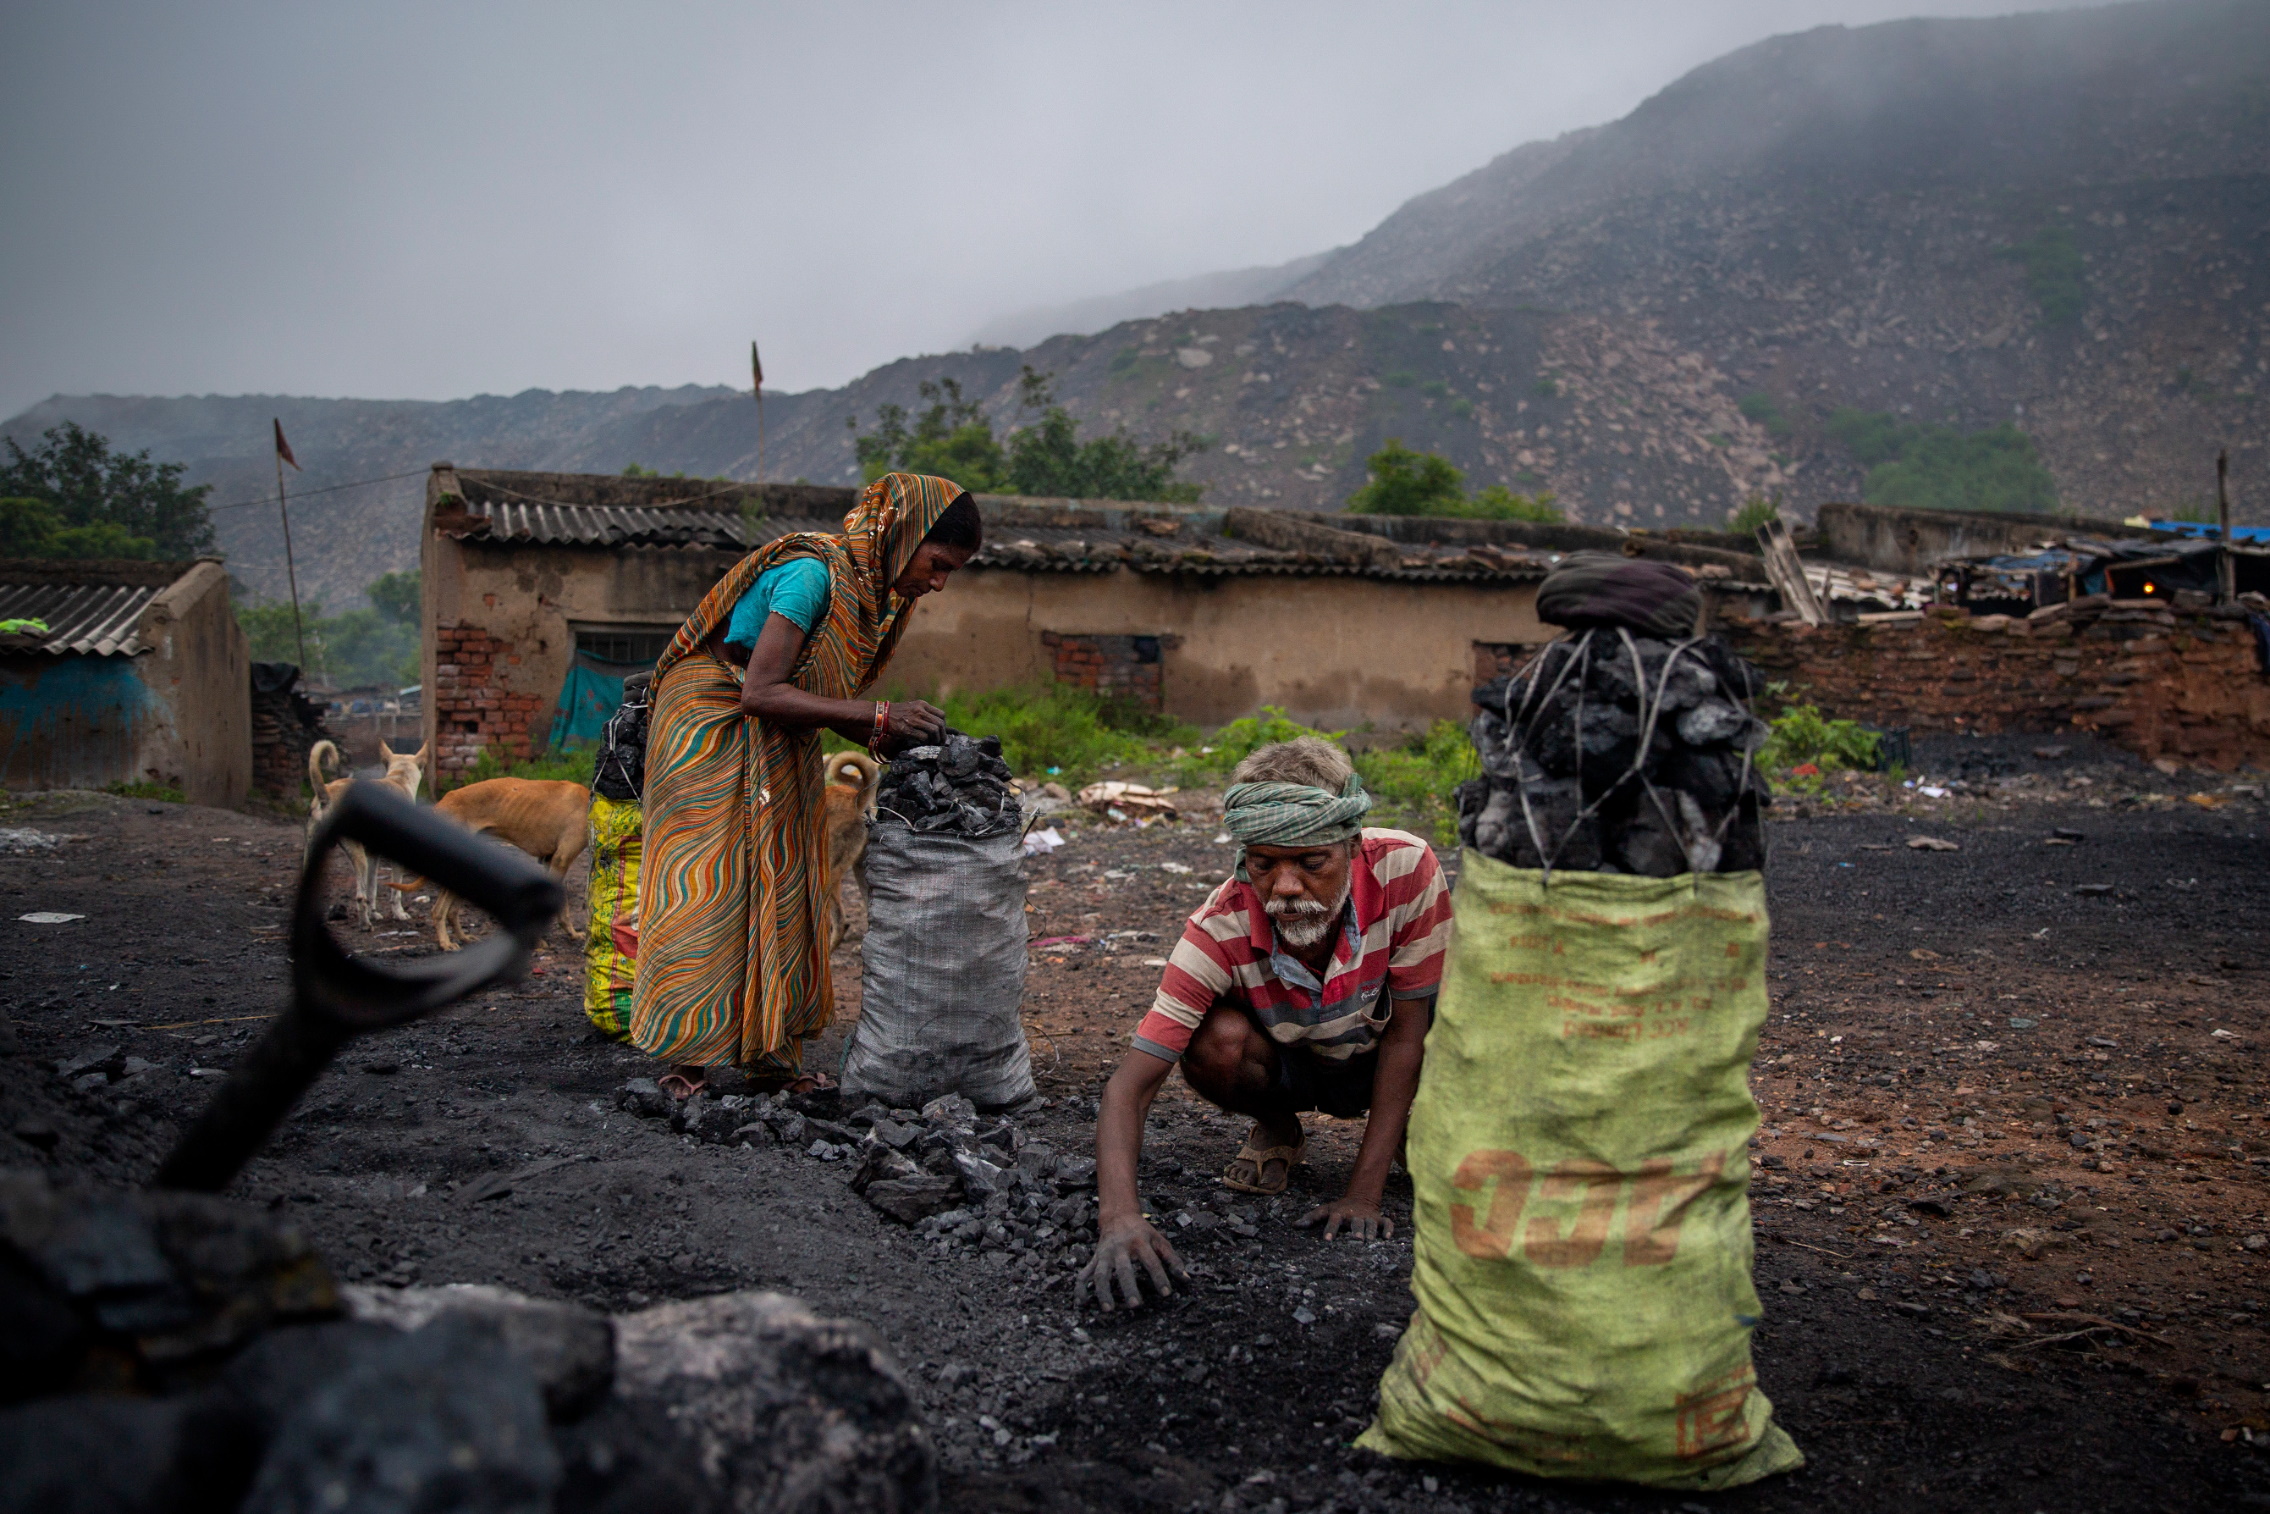 Naresh Chauhan, 50, and his wife Rina Devi, 45, fill sacks with coal in Dhanbad, an eastern Indian city in Jharkhand state. The two have lived in a village at the edge of the Jharia coalfield in Dhanbad all their lives. The couple earn $3 a day selling four baskets of scavenged coal to traders. Photo: Altaf Qadri / AP Photo